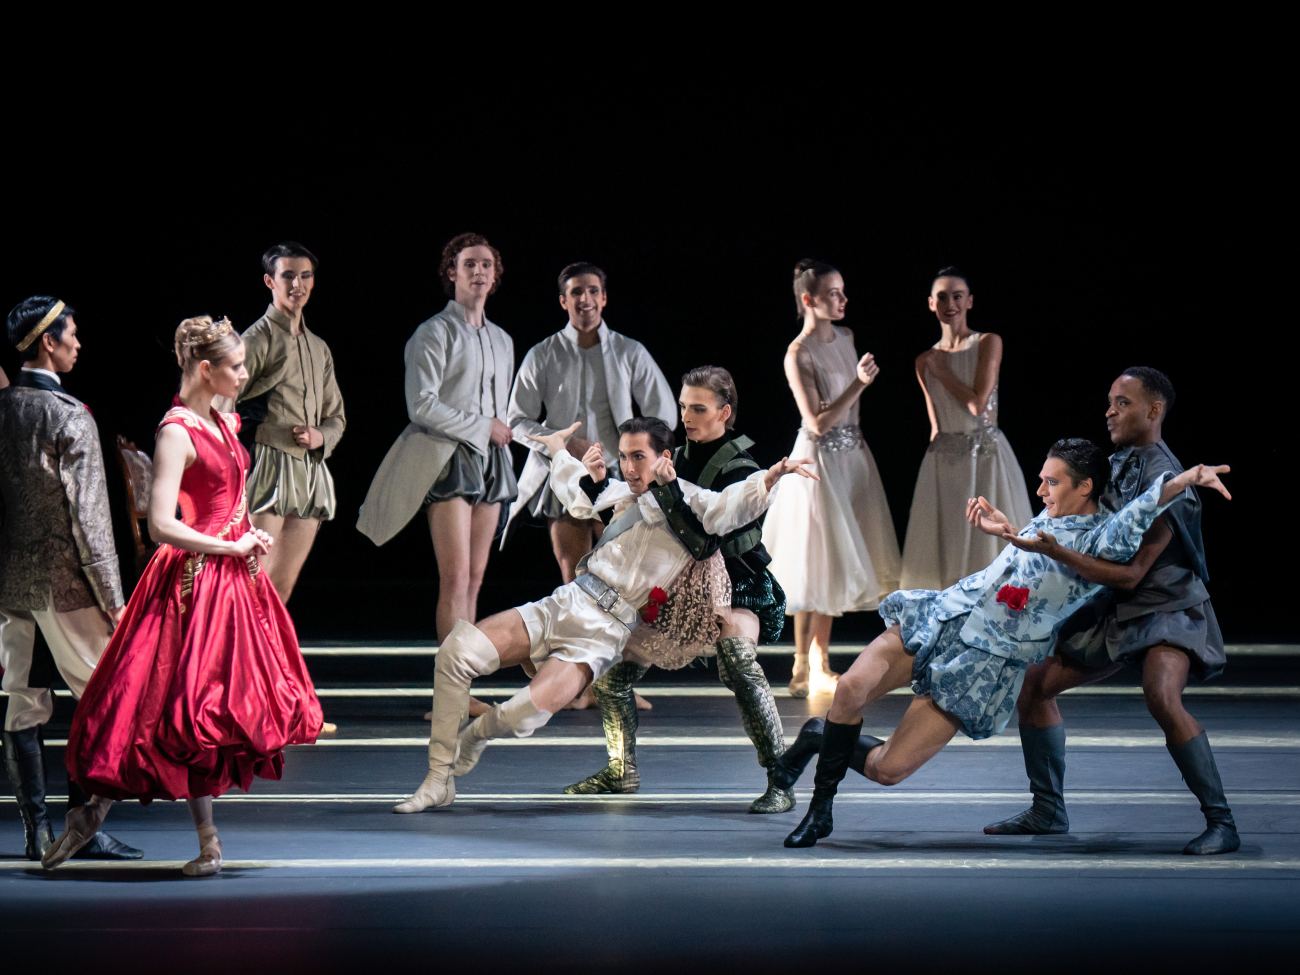 4. M.Kimoto (King), O.Esina (Queen), A.Vandervelde (Prince), K.Pokorný (Prince), G.Wielick (Prince), R.Arts (Prince), and ensemble, “The Sleeping Beauty” by M.Schläpfer and M.Petipa, Vienna State Ballet 2022 © Vienna State Ballet / A.Taylor